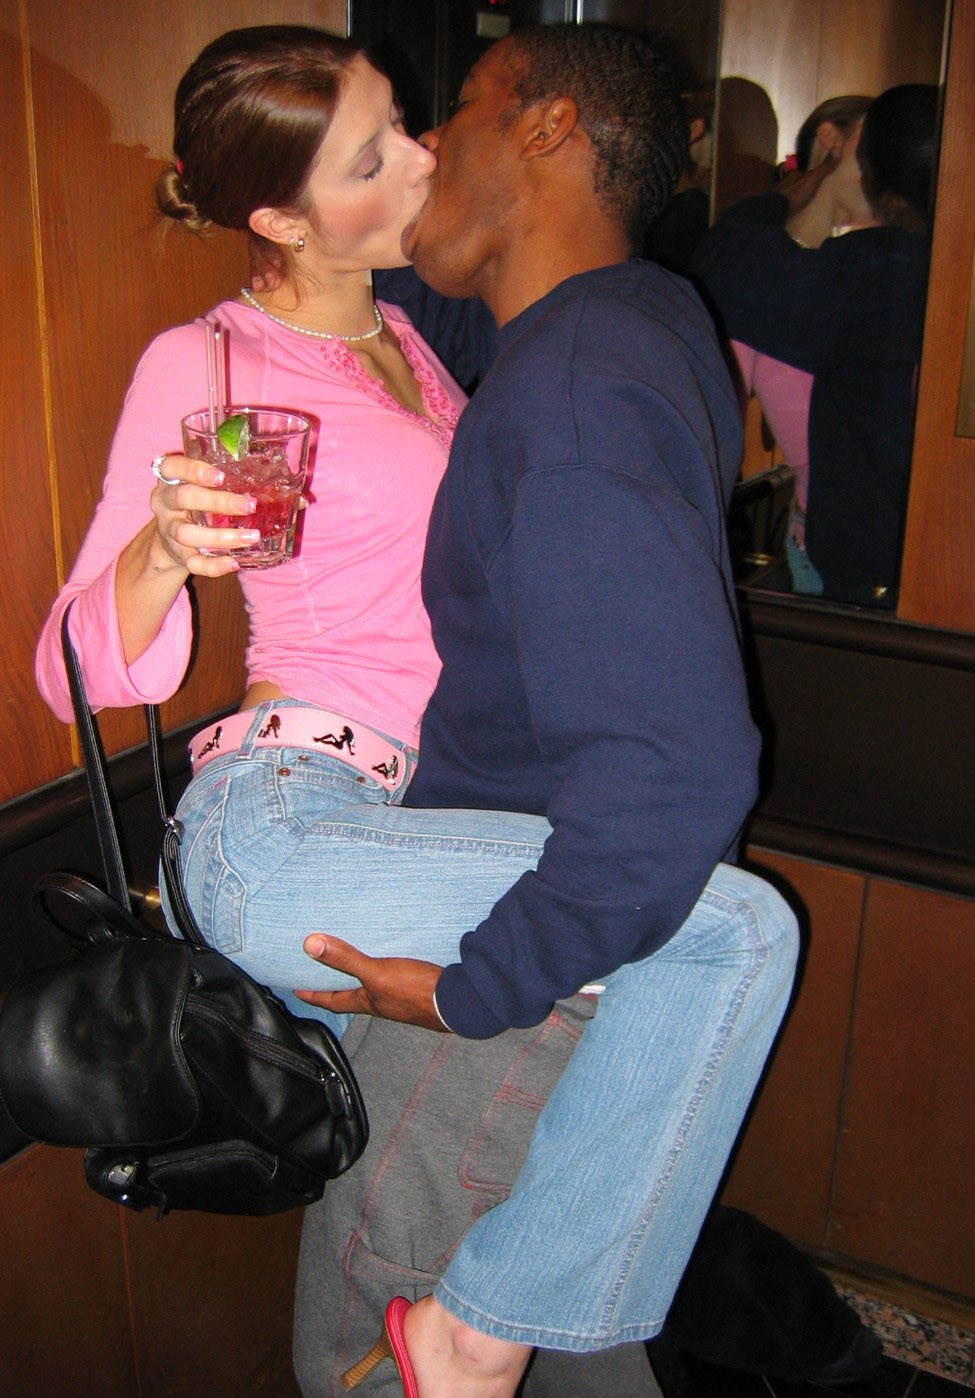 Amateur Interracial Pictures and Videos